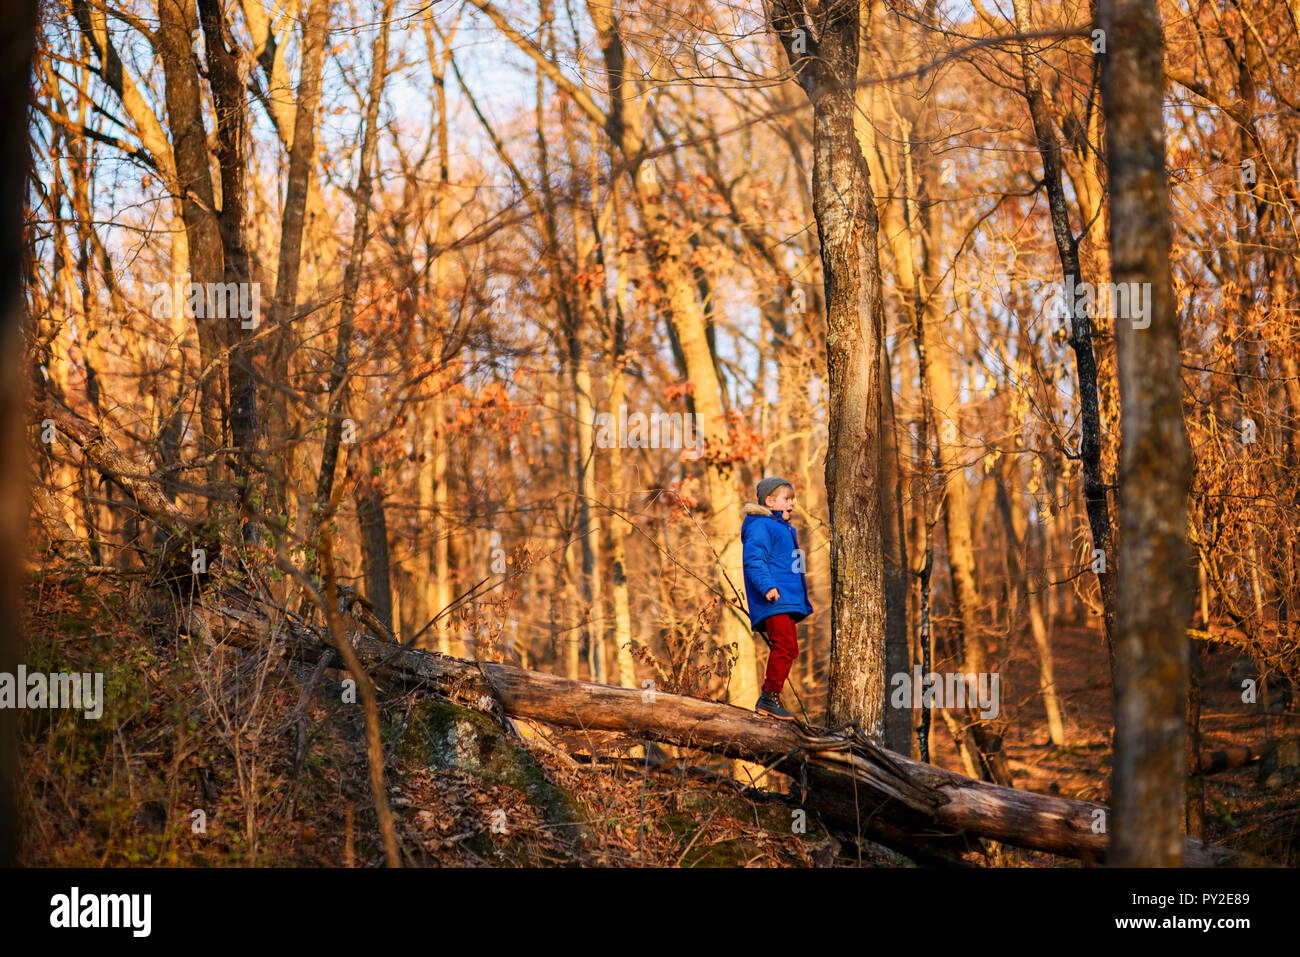 Boy standing on a fallen tree in the woods, United States Stock Photo